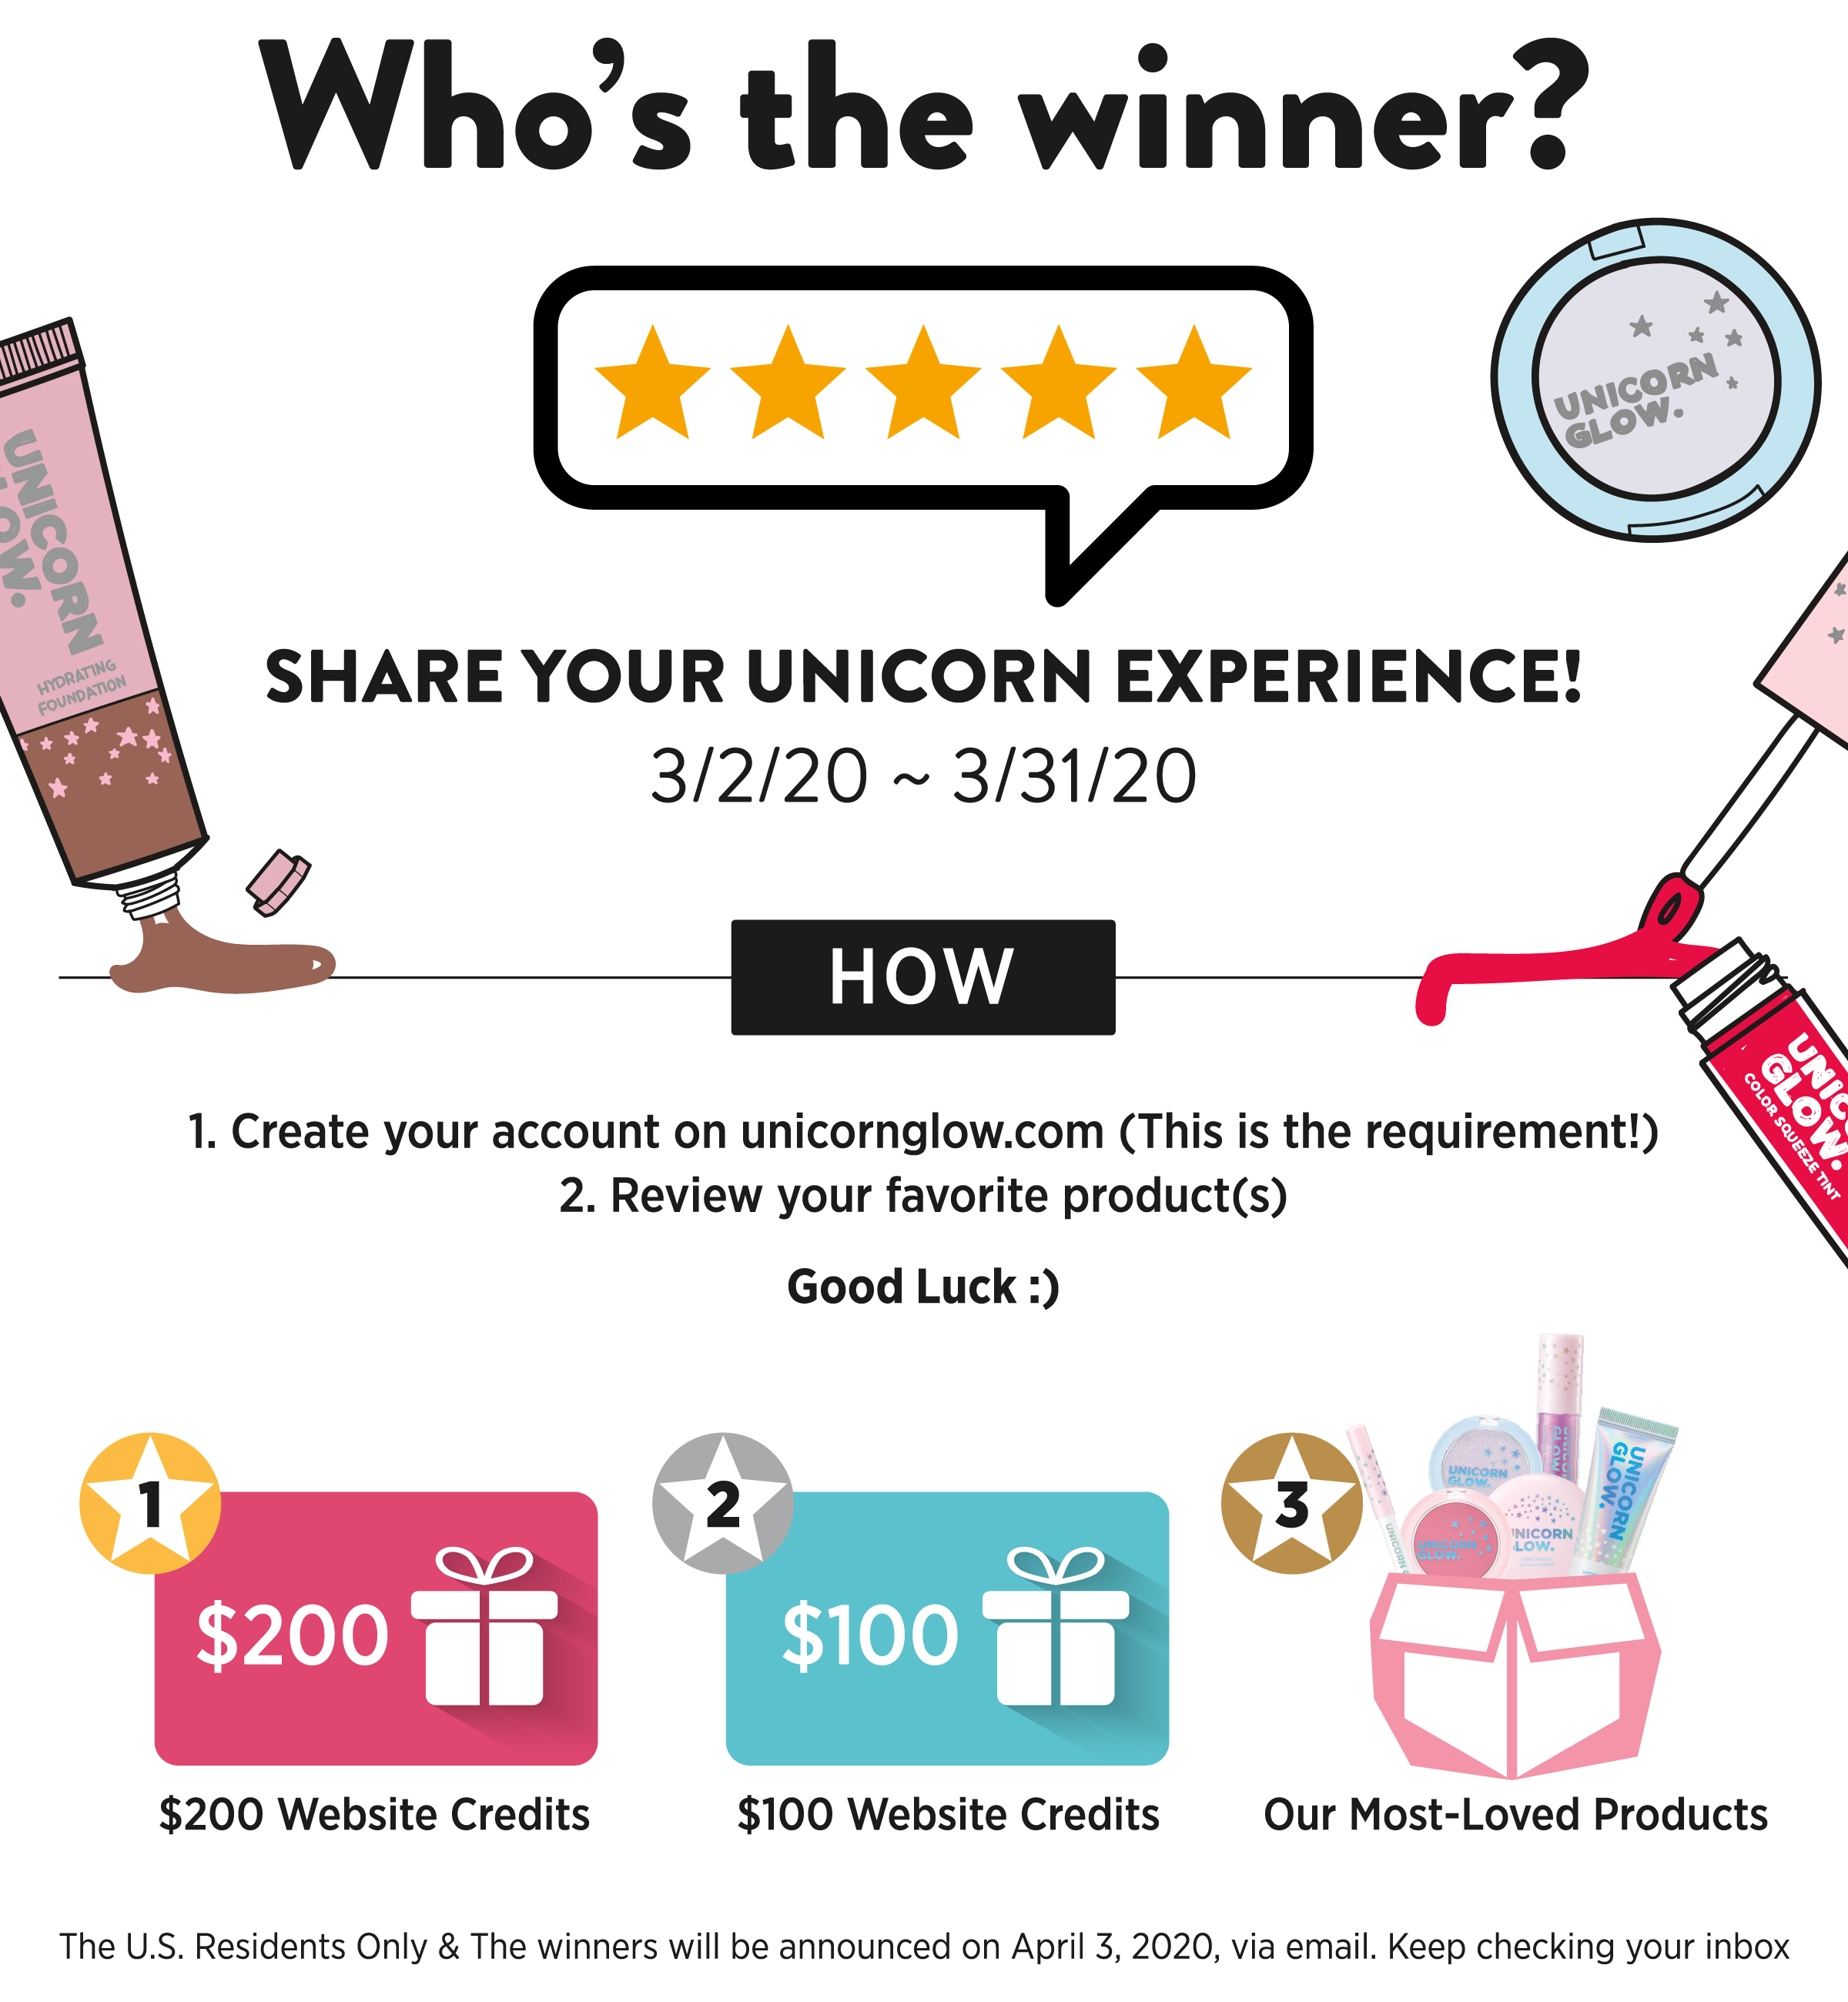 unicorn glow review event winner experience share